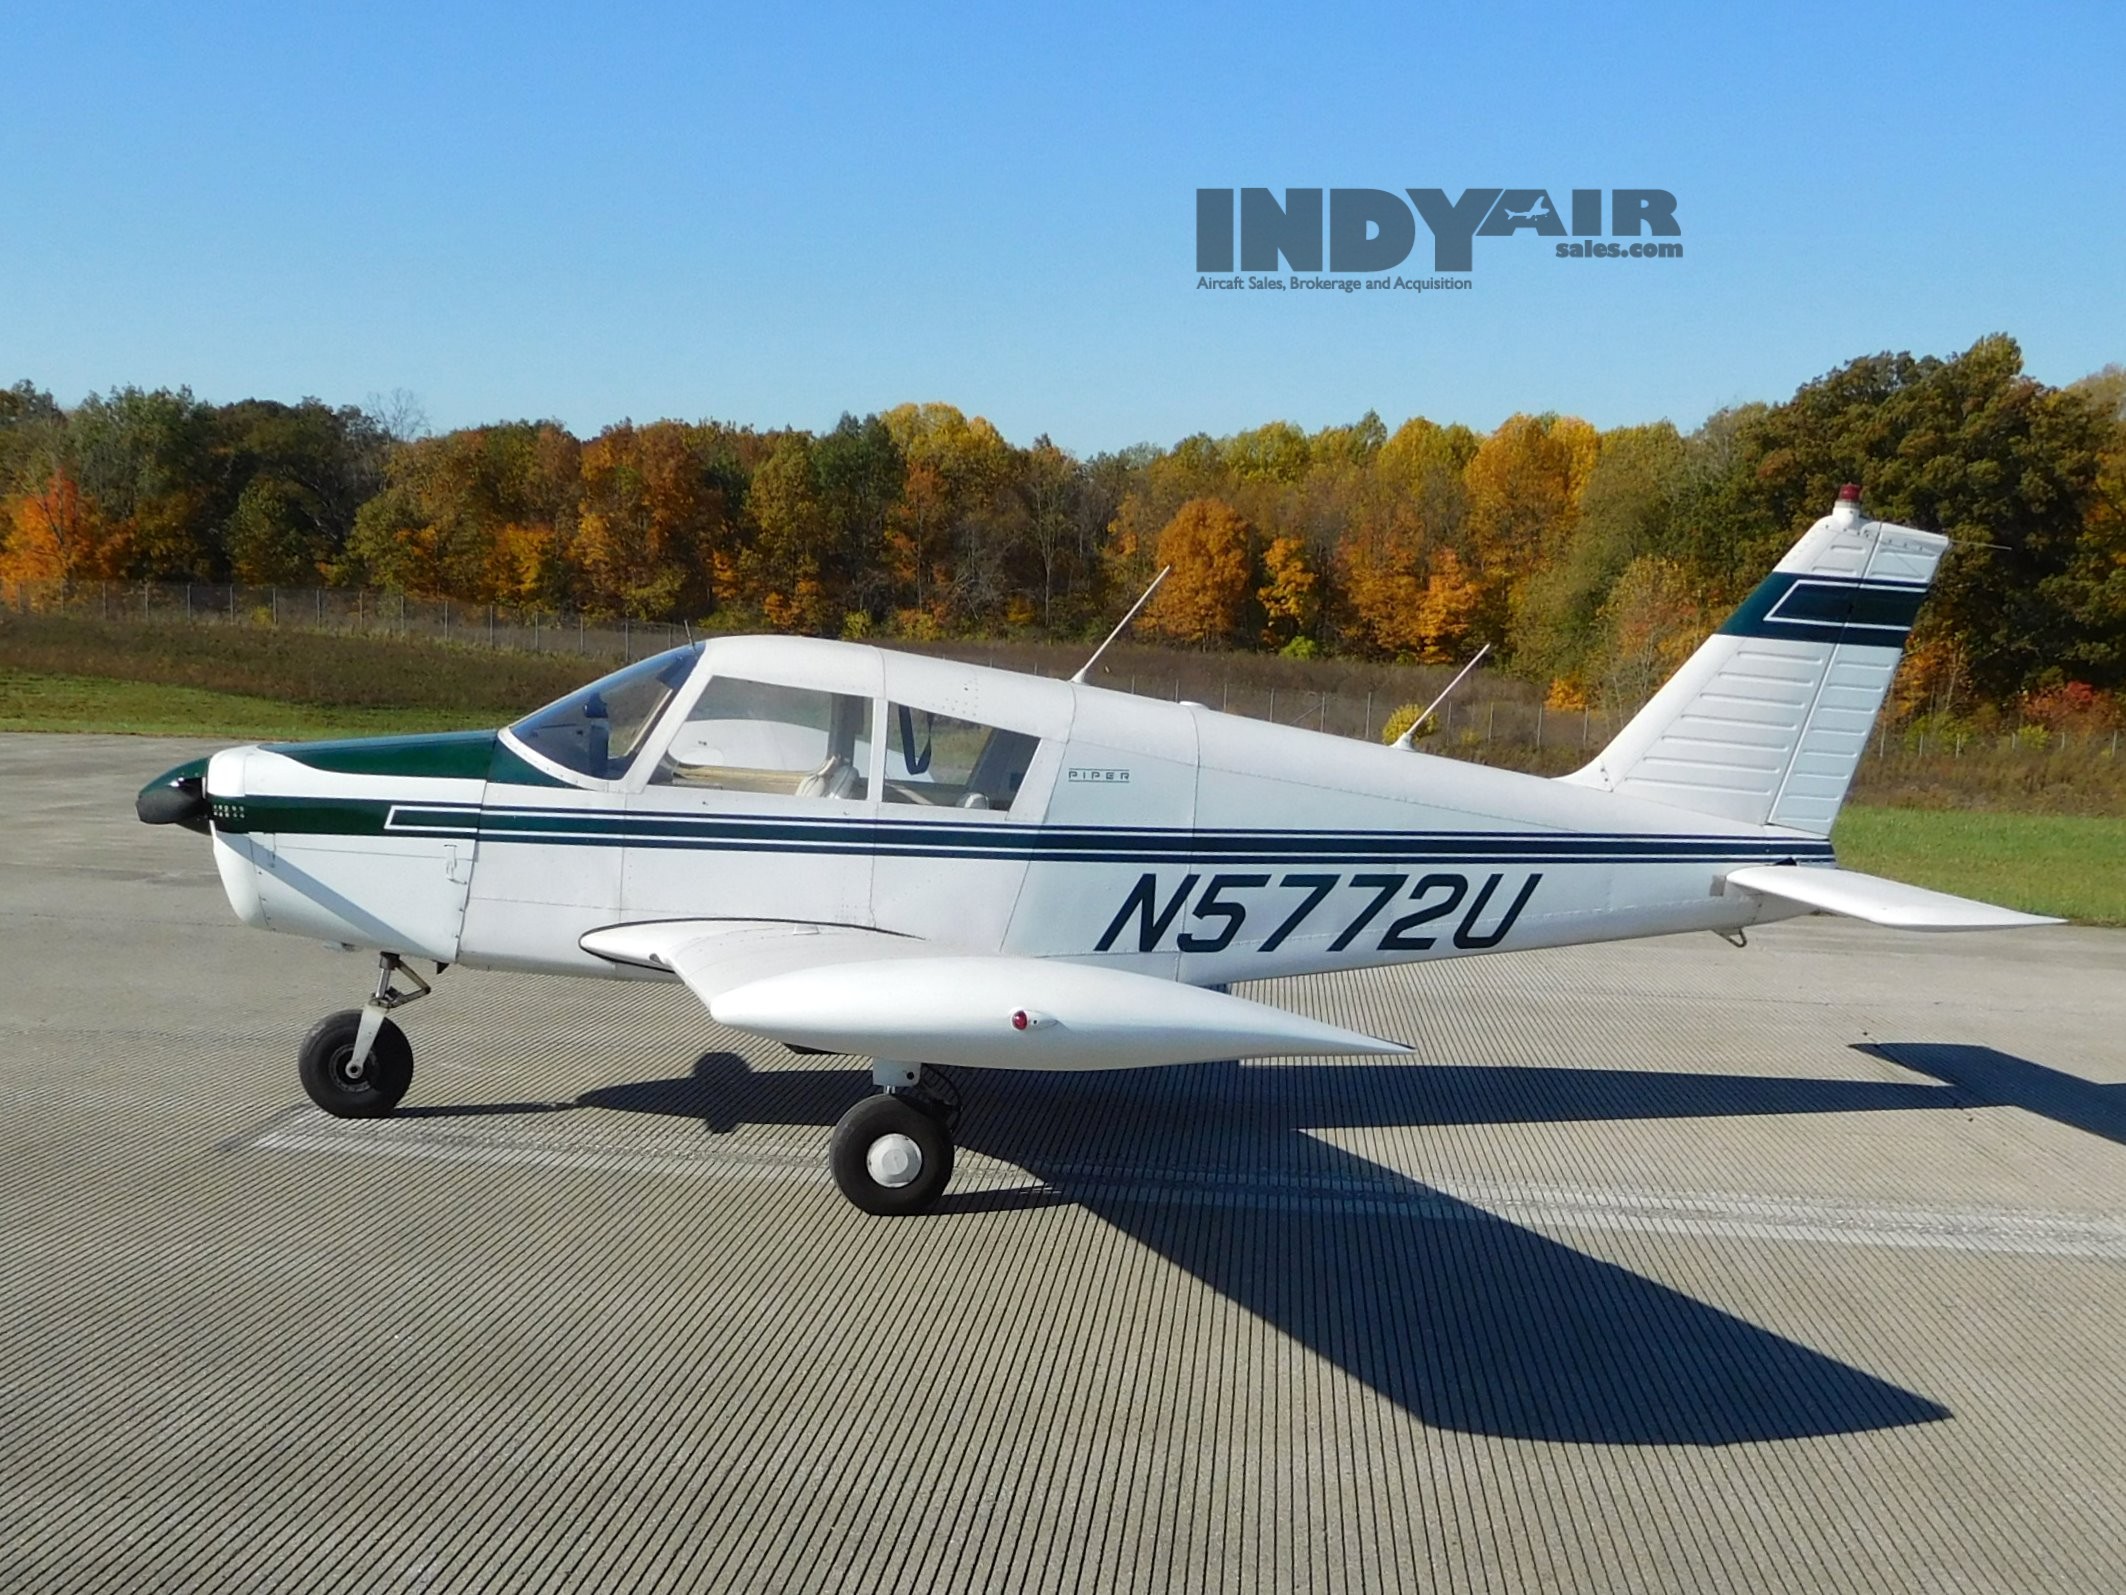 Sold 1970 Piper Cherokee N5772u Aircraft For Sale Indy Air Sales